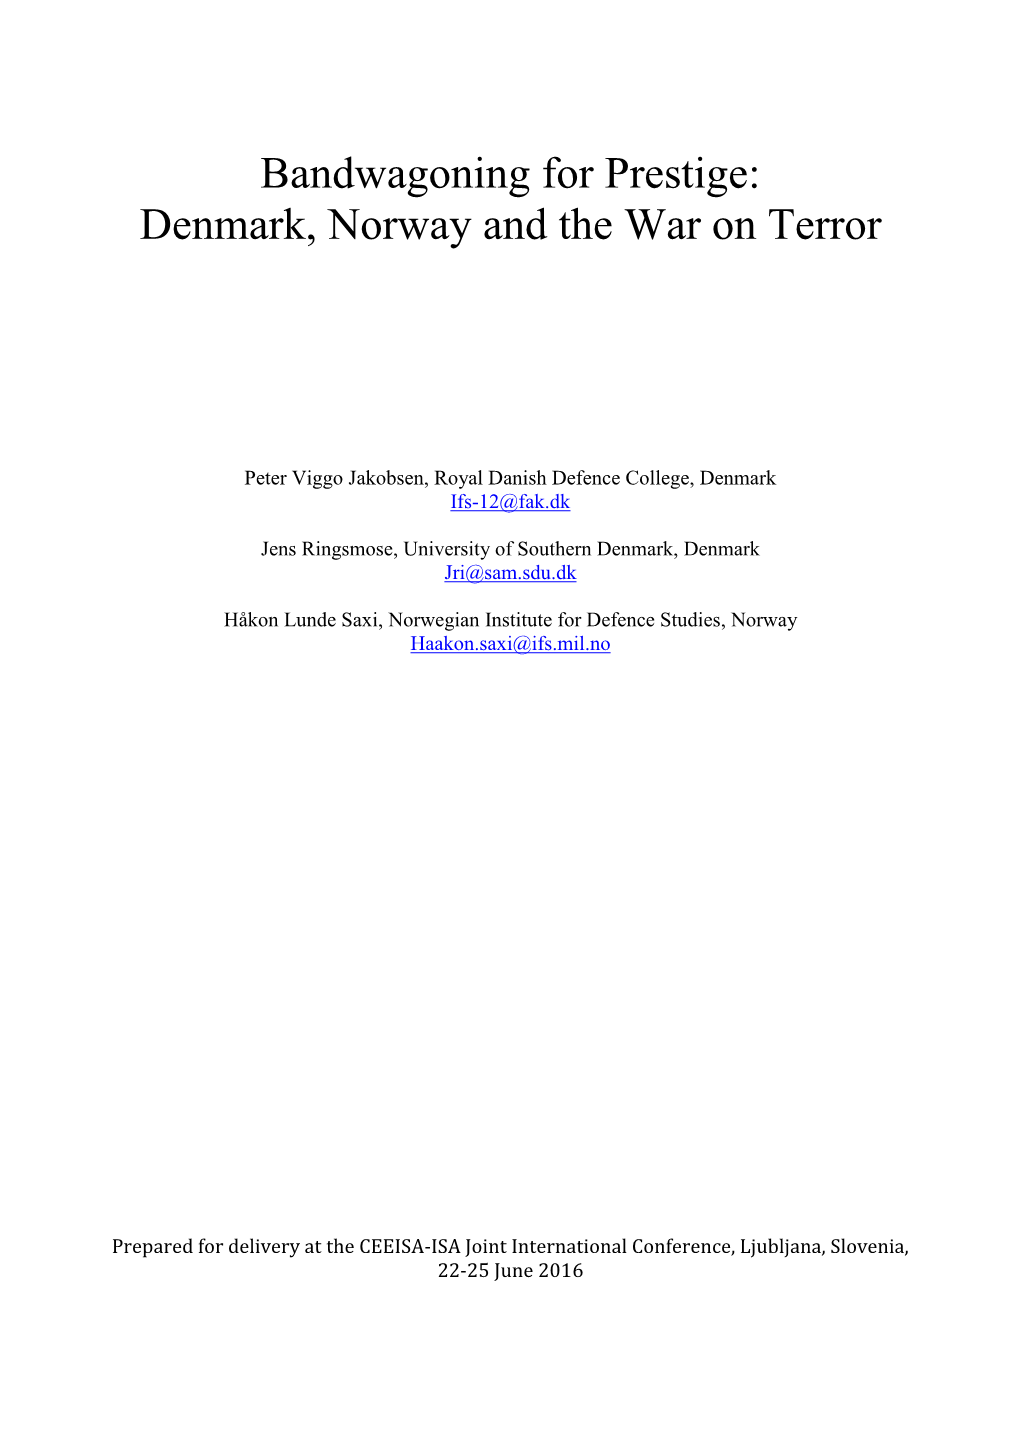 Bandwagoning for Prestige: Denmark, Norway and the War on Terror